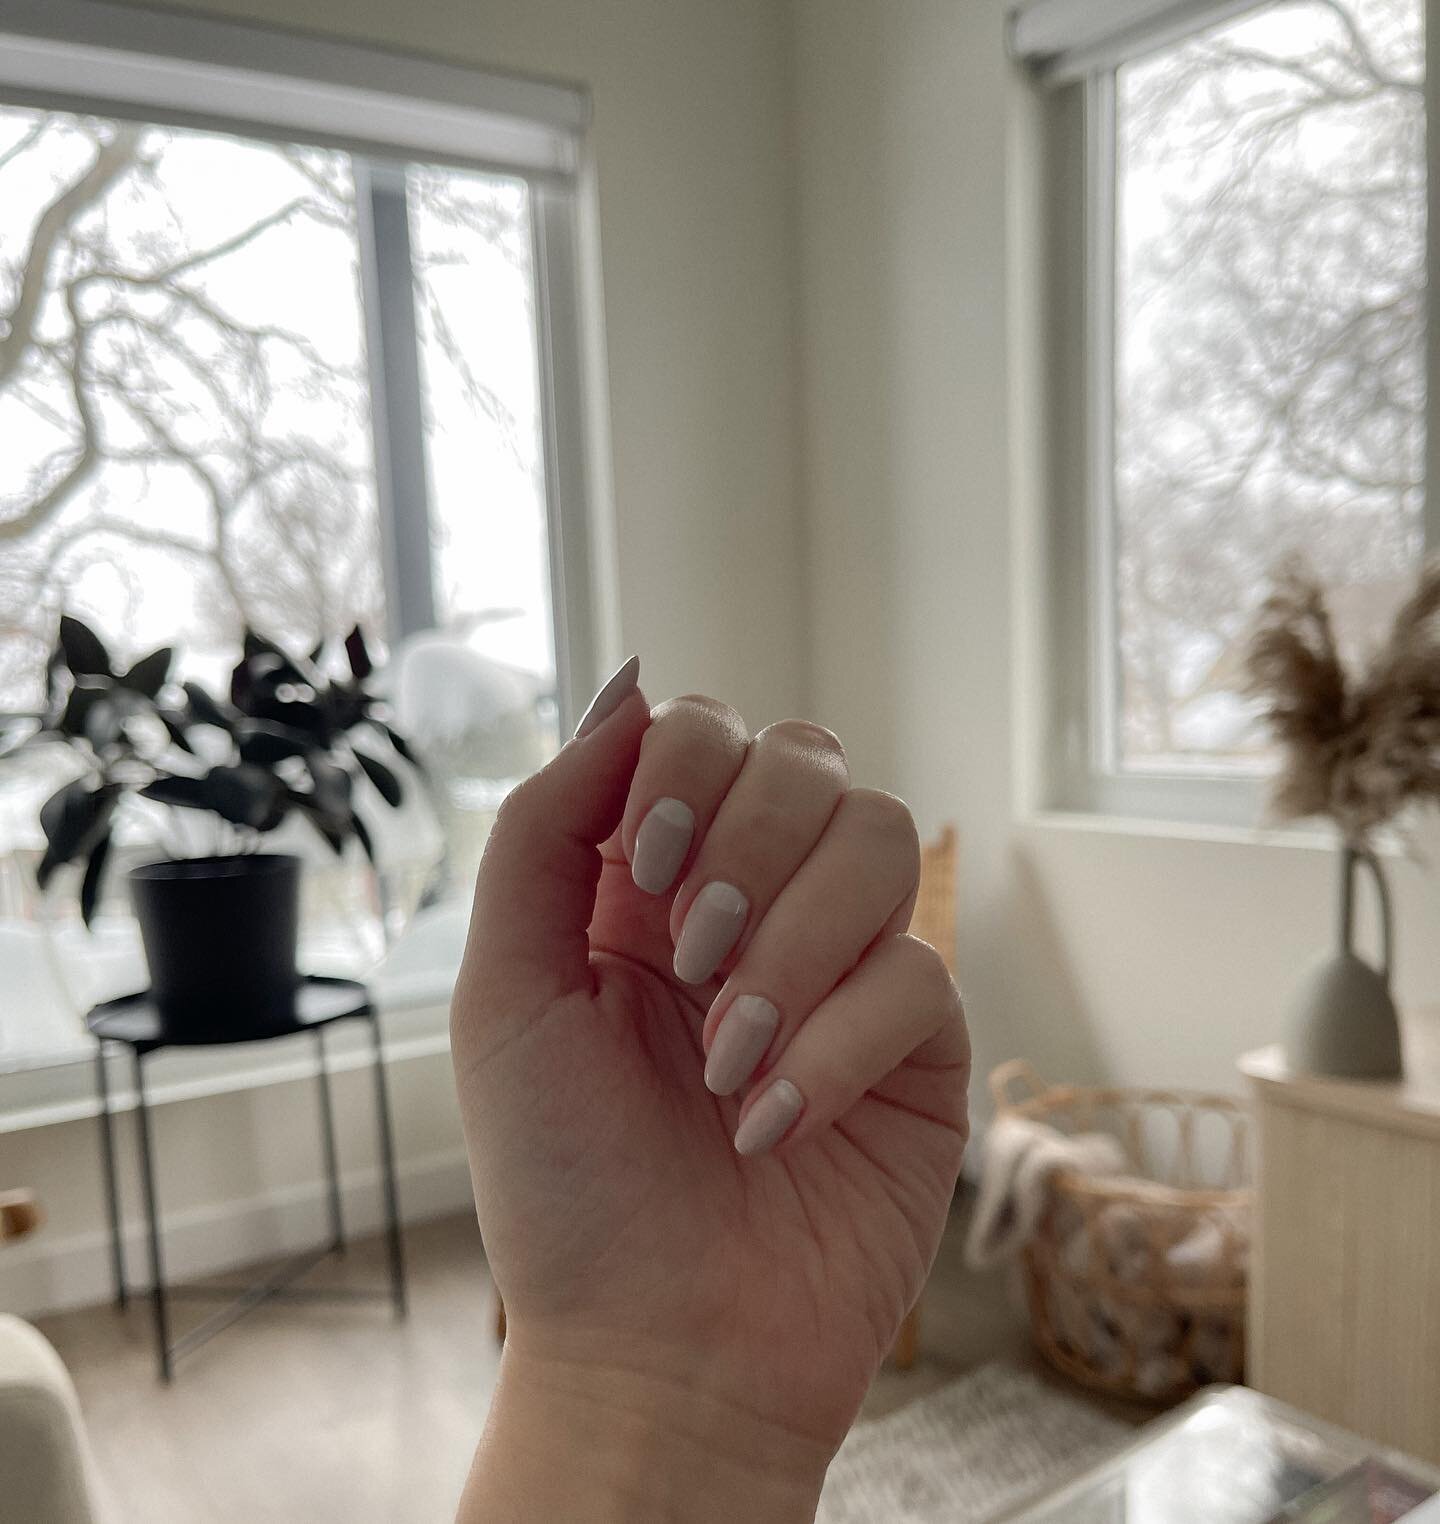 forgot to post this before I repainted my nails 🤓 one of my fav designs that doesn&rsquo;t take very long!

-

#nailfie #whatimwearingnow #fashion #aestheticmood #minimalfeed #lifestyleblogging #creativechics #neutralstyle #aestheticposts #minimalst